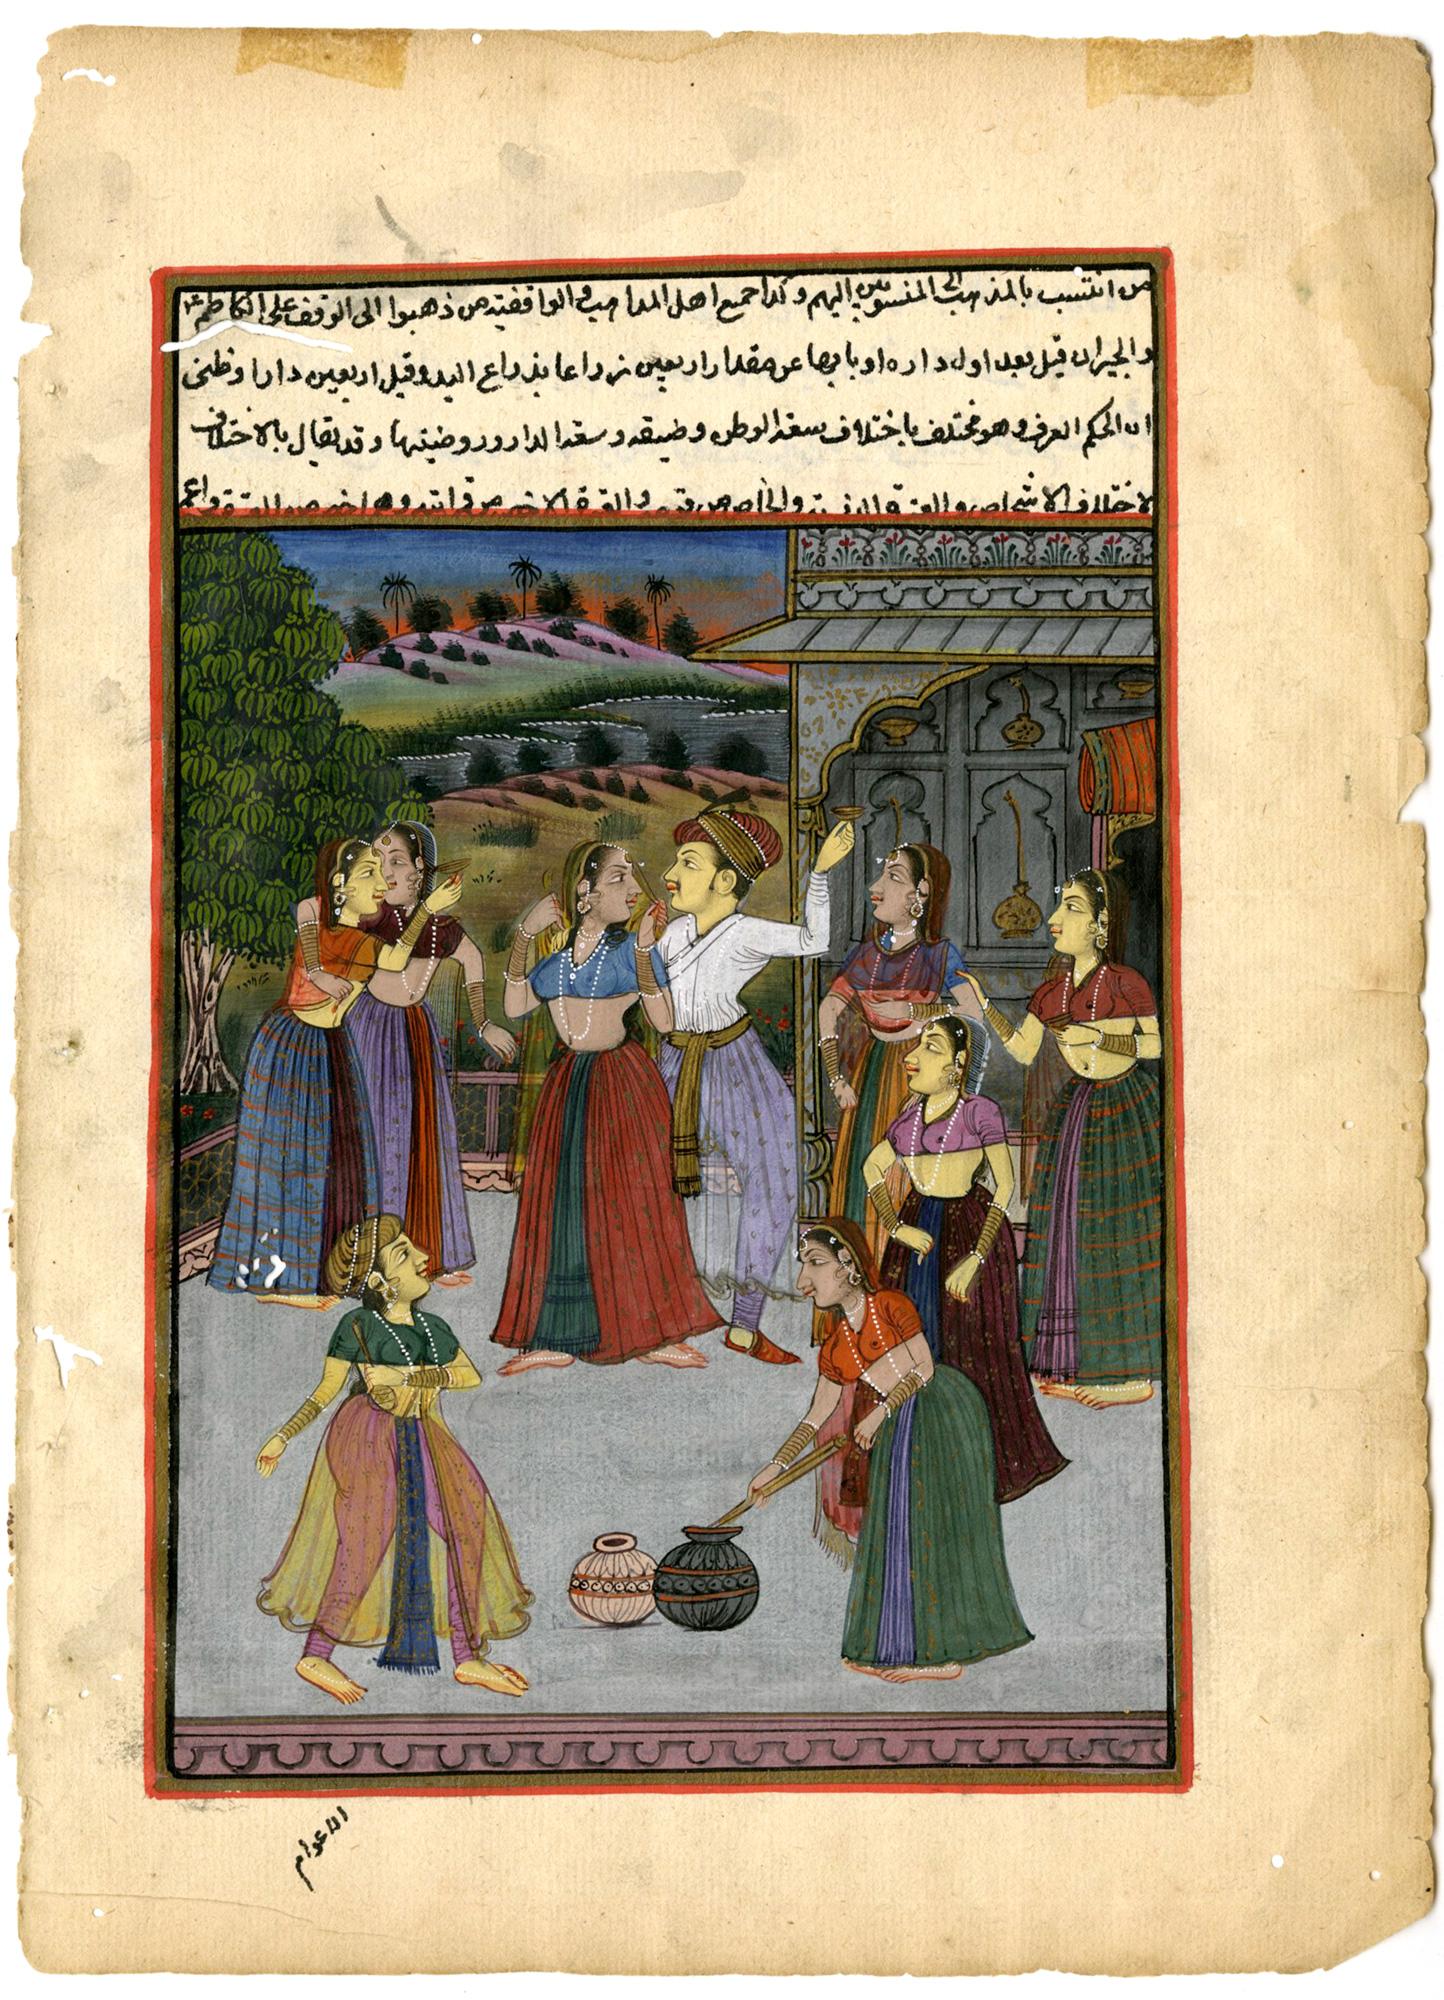 Unknown Portrait - Mughal School, 18th century – Emperor Jahangir dancing with his harem attendees